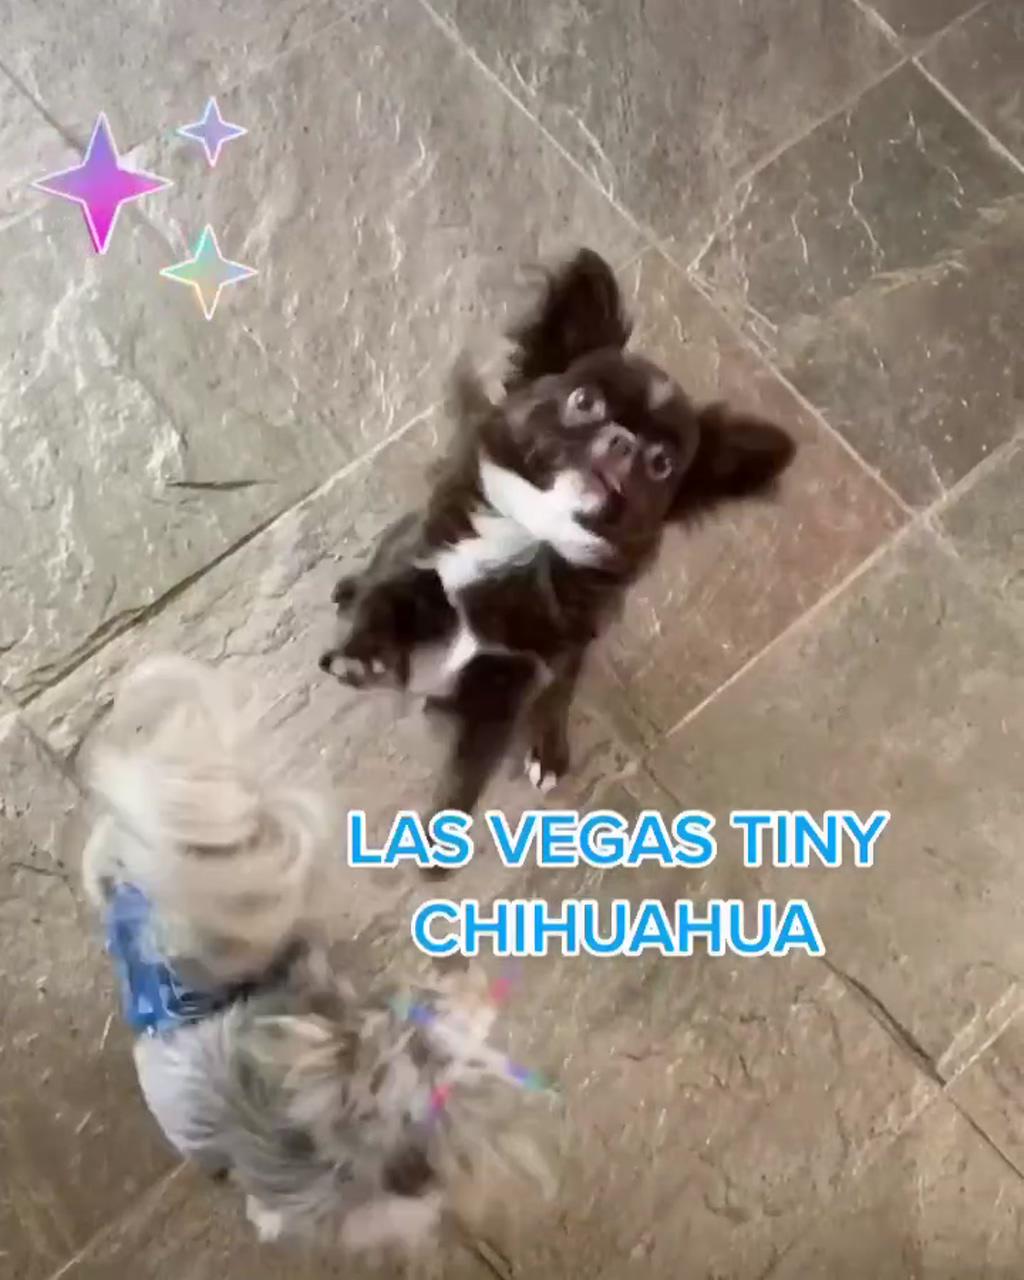 Chihuahua. topless dancer from las vegas; chihuahua dog 